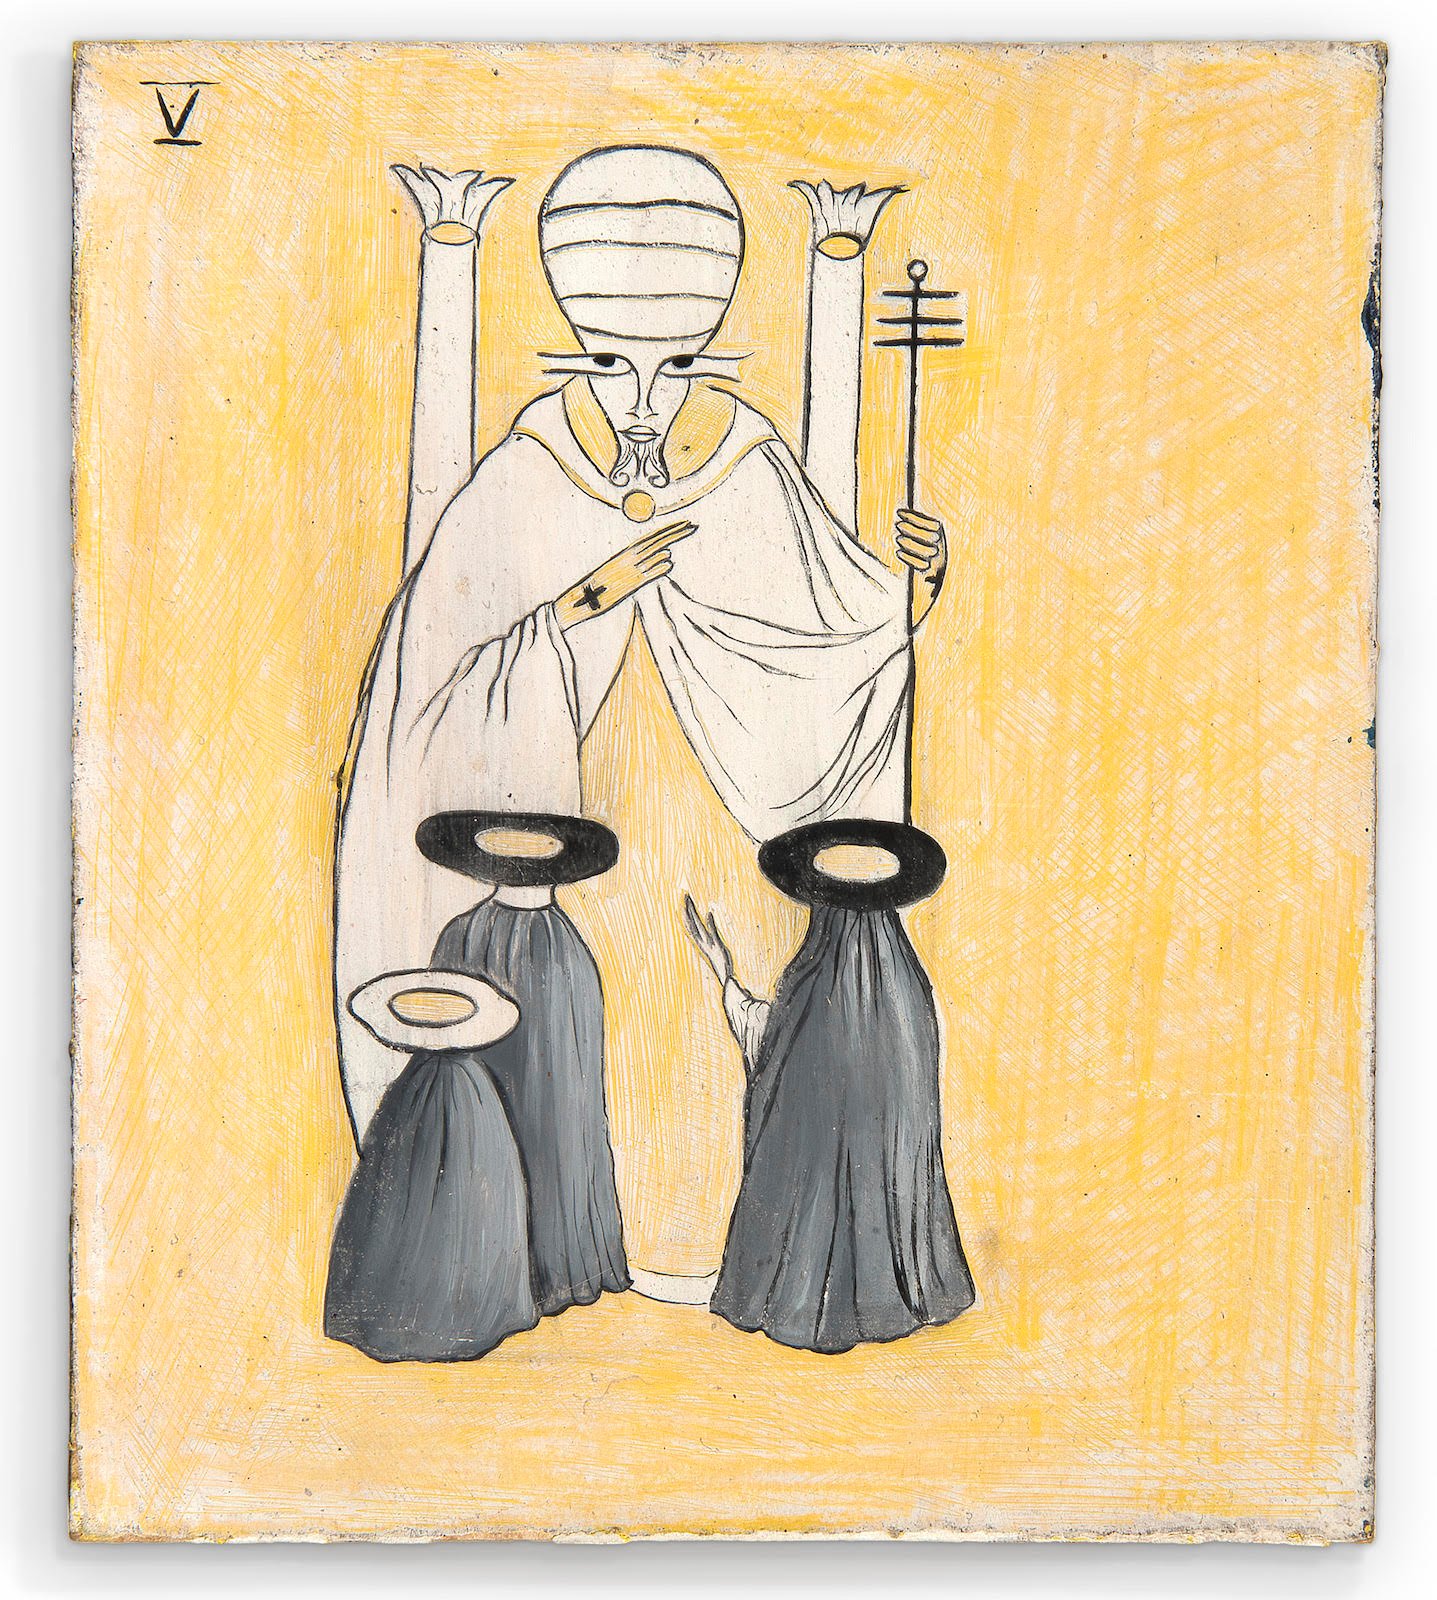 The Surrealist Artist Leonora Carrington Created A Little Known Suite Of Tarot Card Paintings And Now You Can Own A Facsimile Set